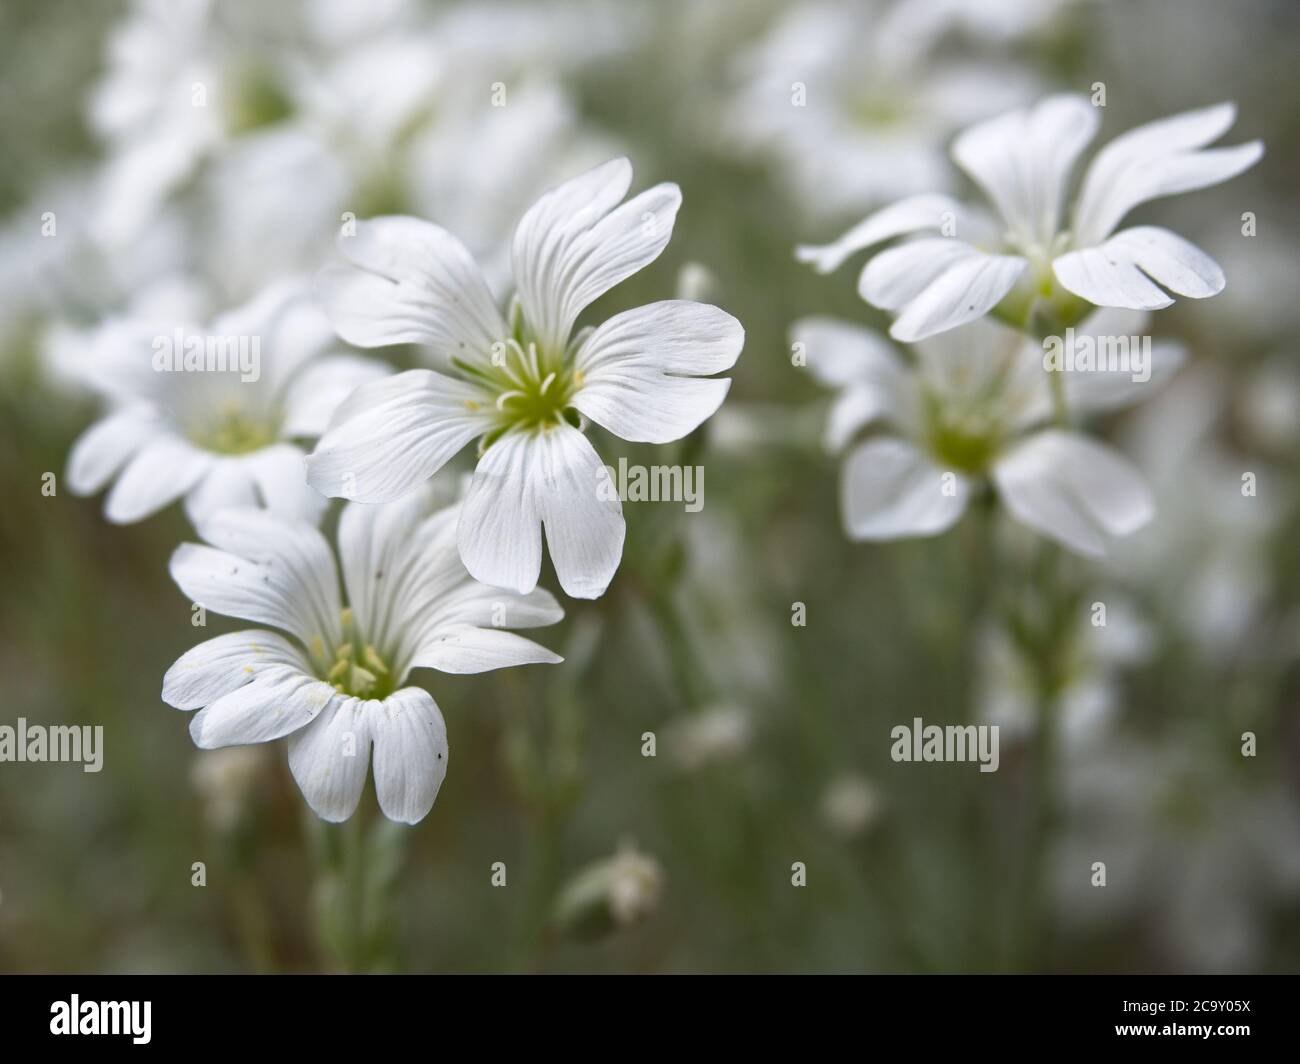 Close-up of chickweed flowers. Blooming white flowers. Cerastium arvense. Selective focus on the foreground, blurred background. Stock Photo